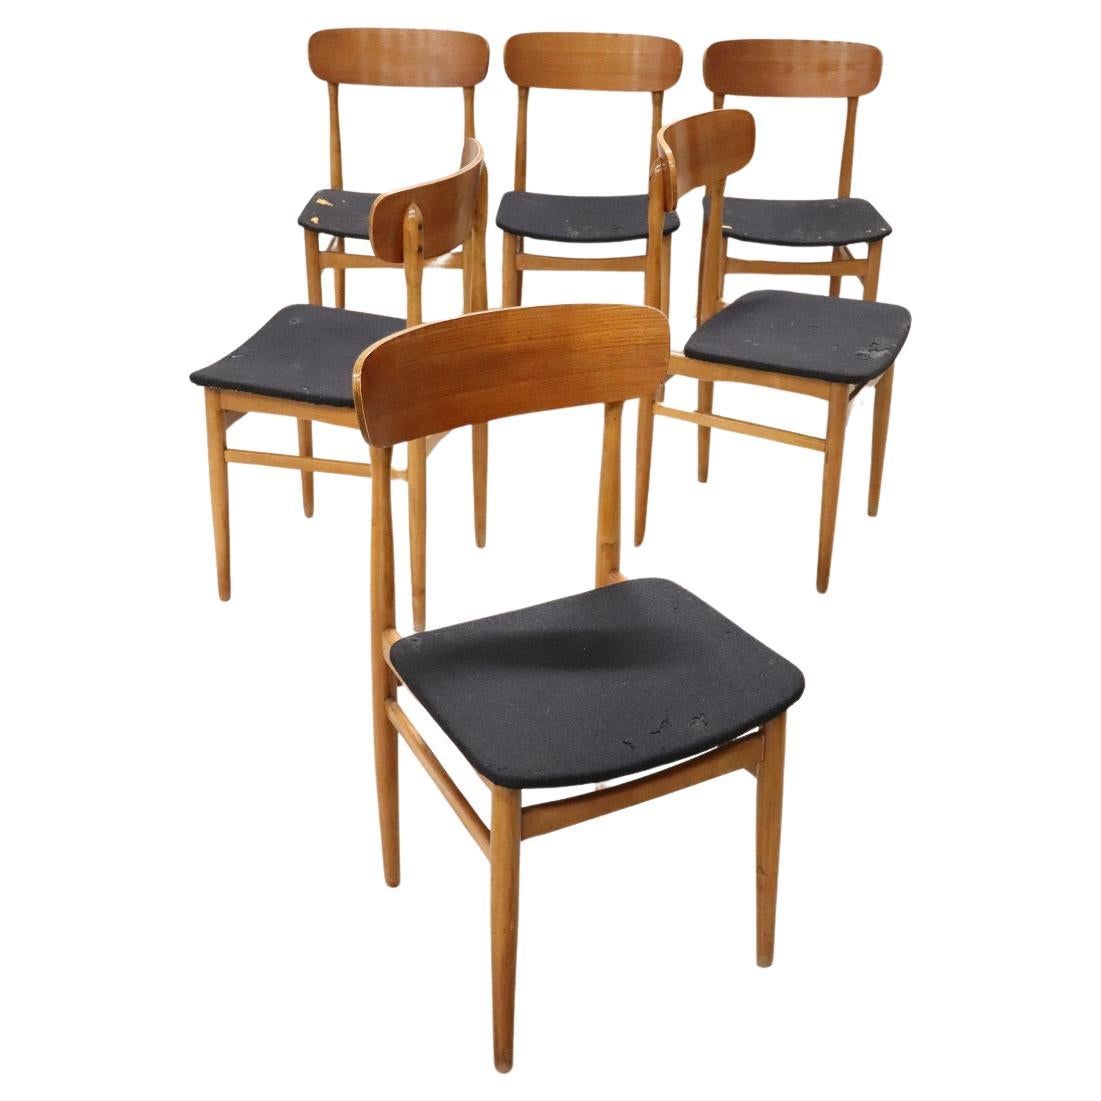 Set of Six Scandinavian Design Dining Chairs, 1960s For Sale